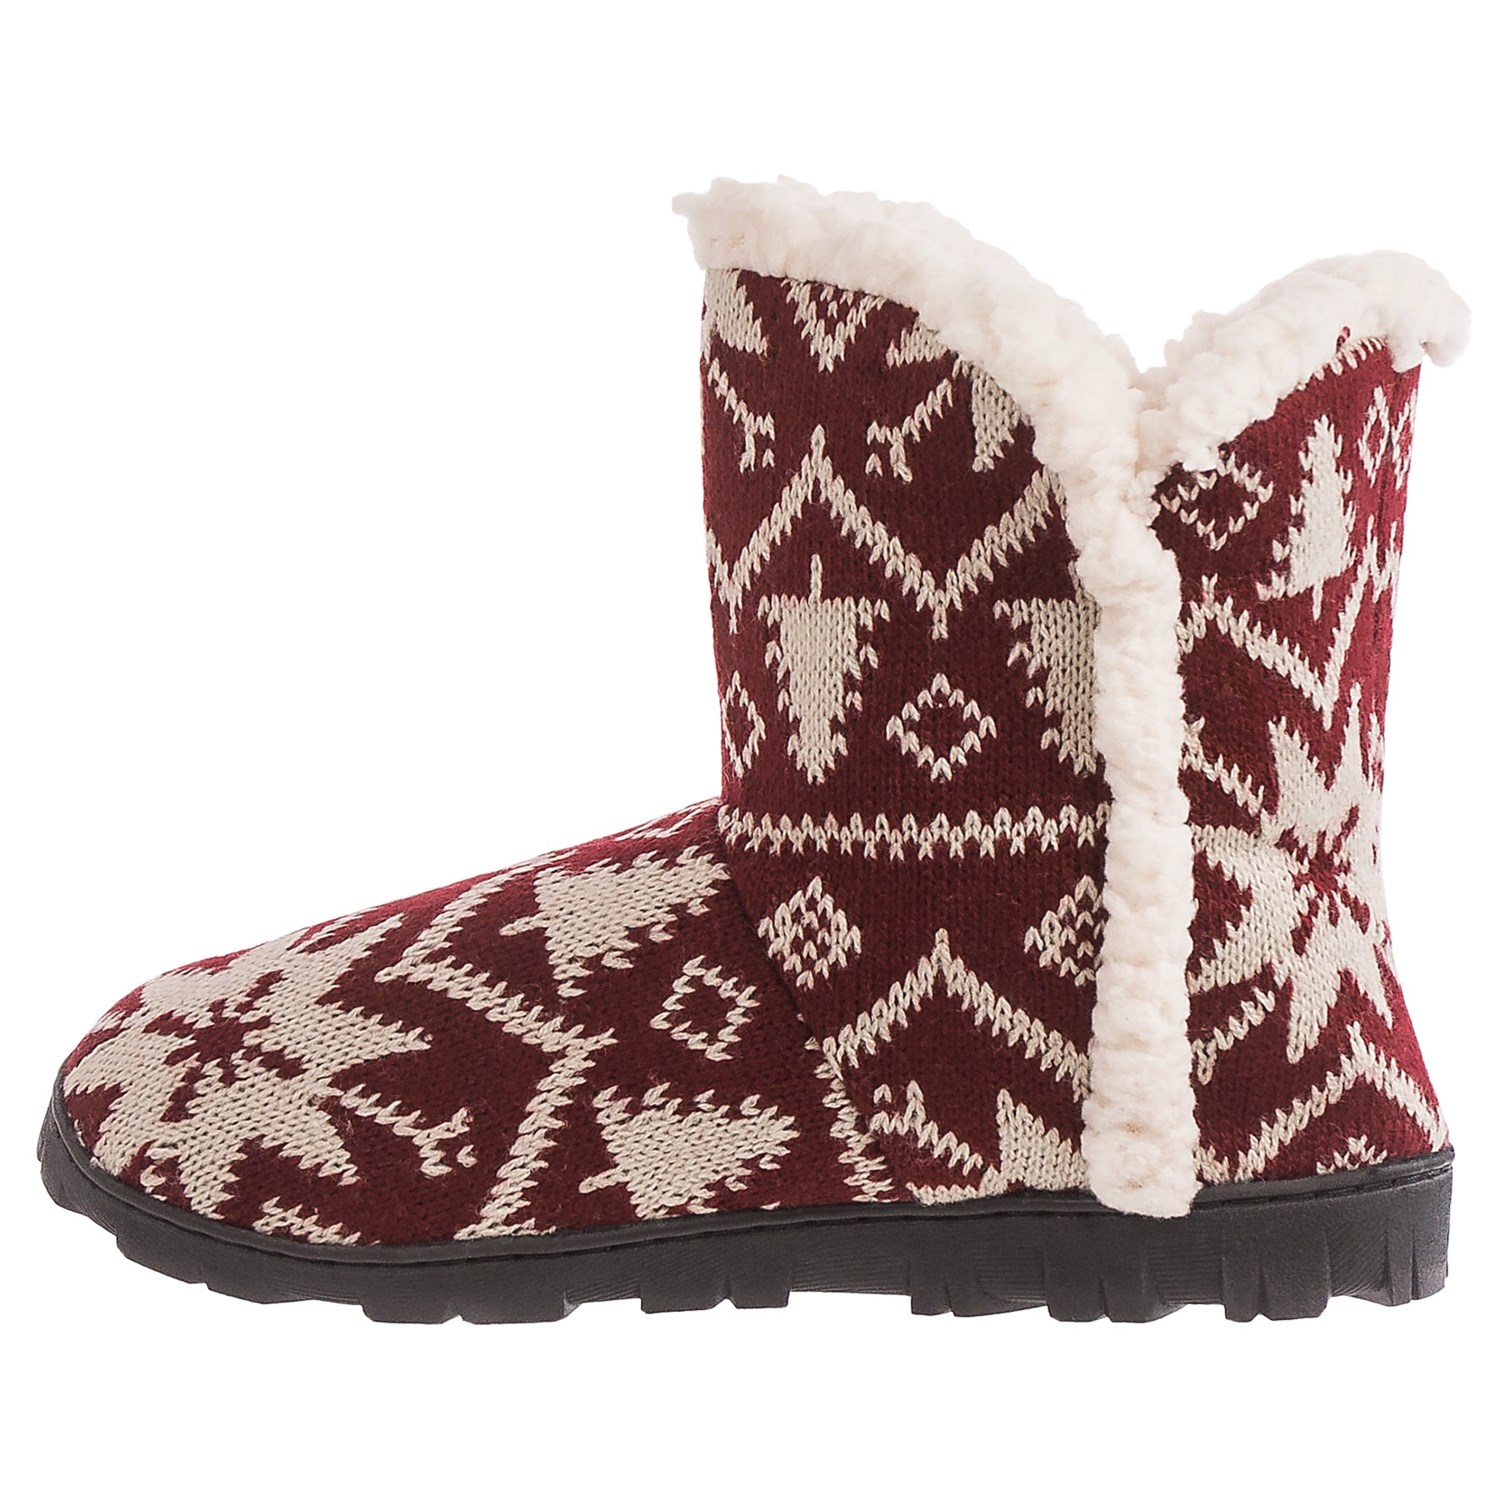 Muk Luks Faux-Fur Trim Boot Slippers (For Women) - Save 82%